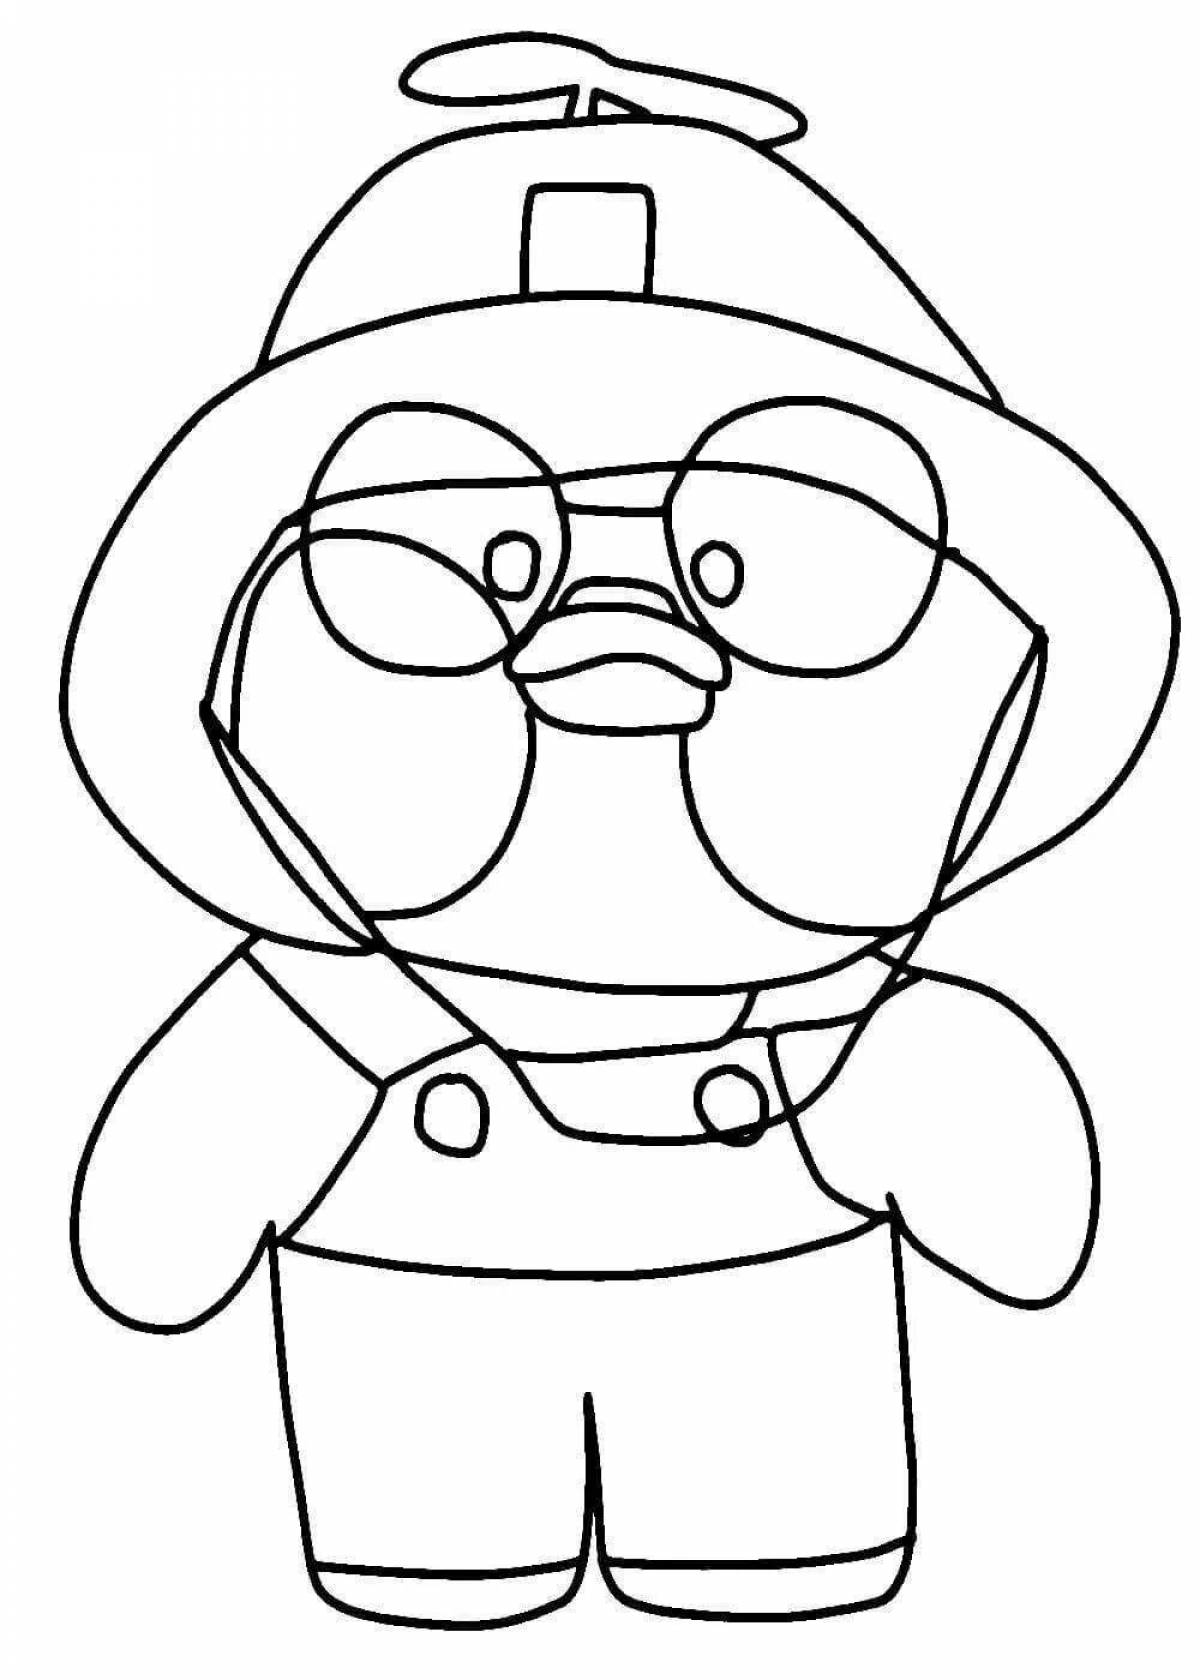 Colorful lafanfan duck coloring page